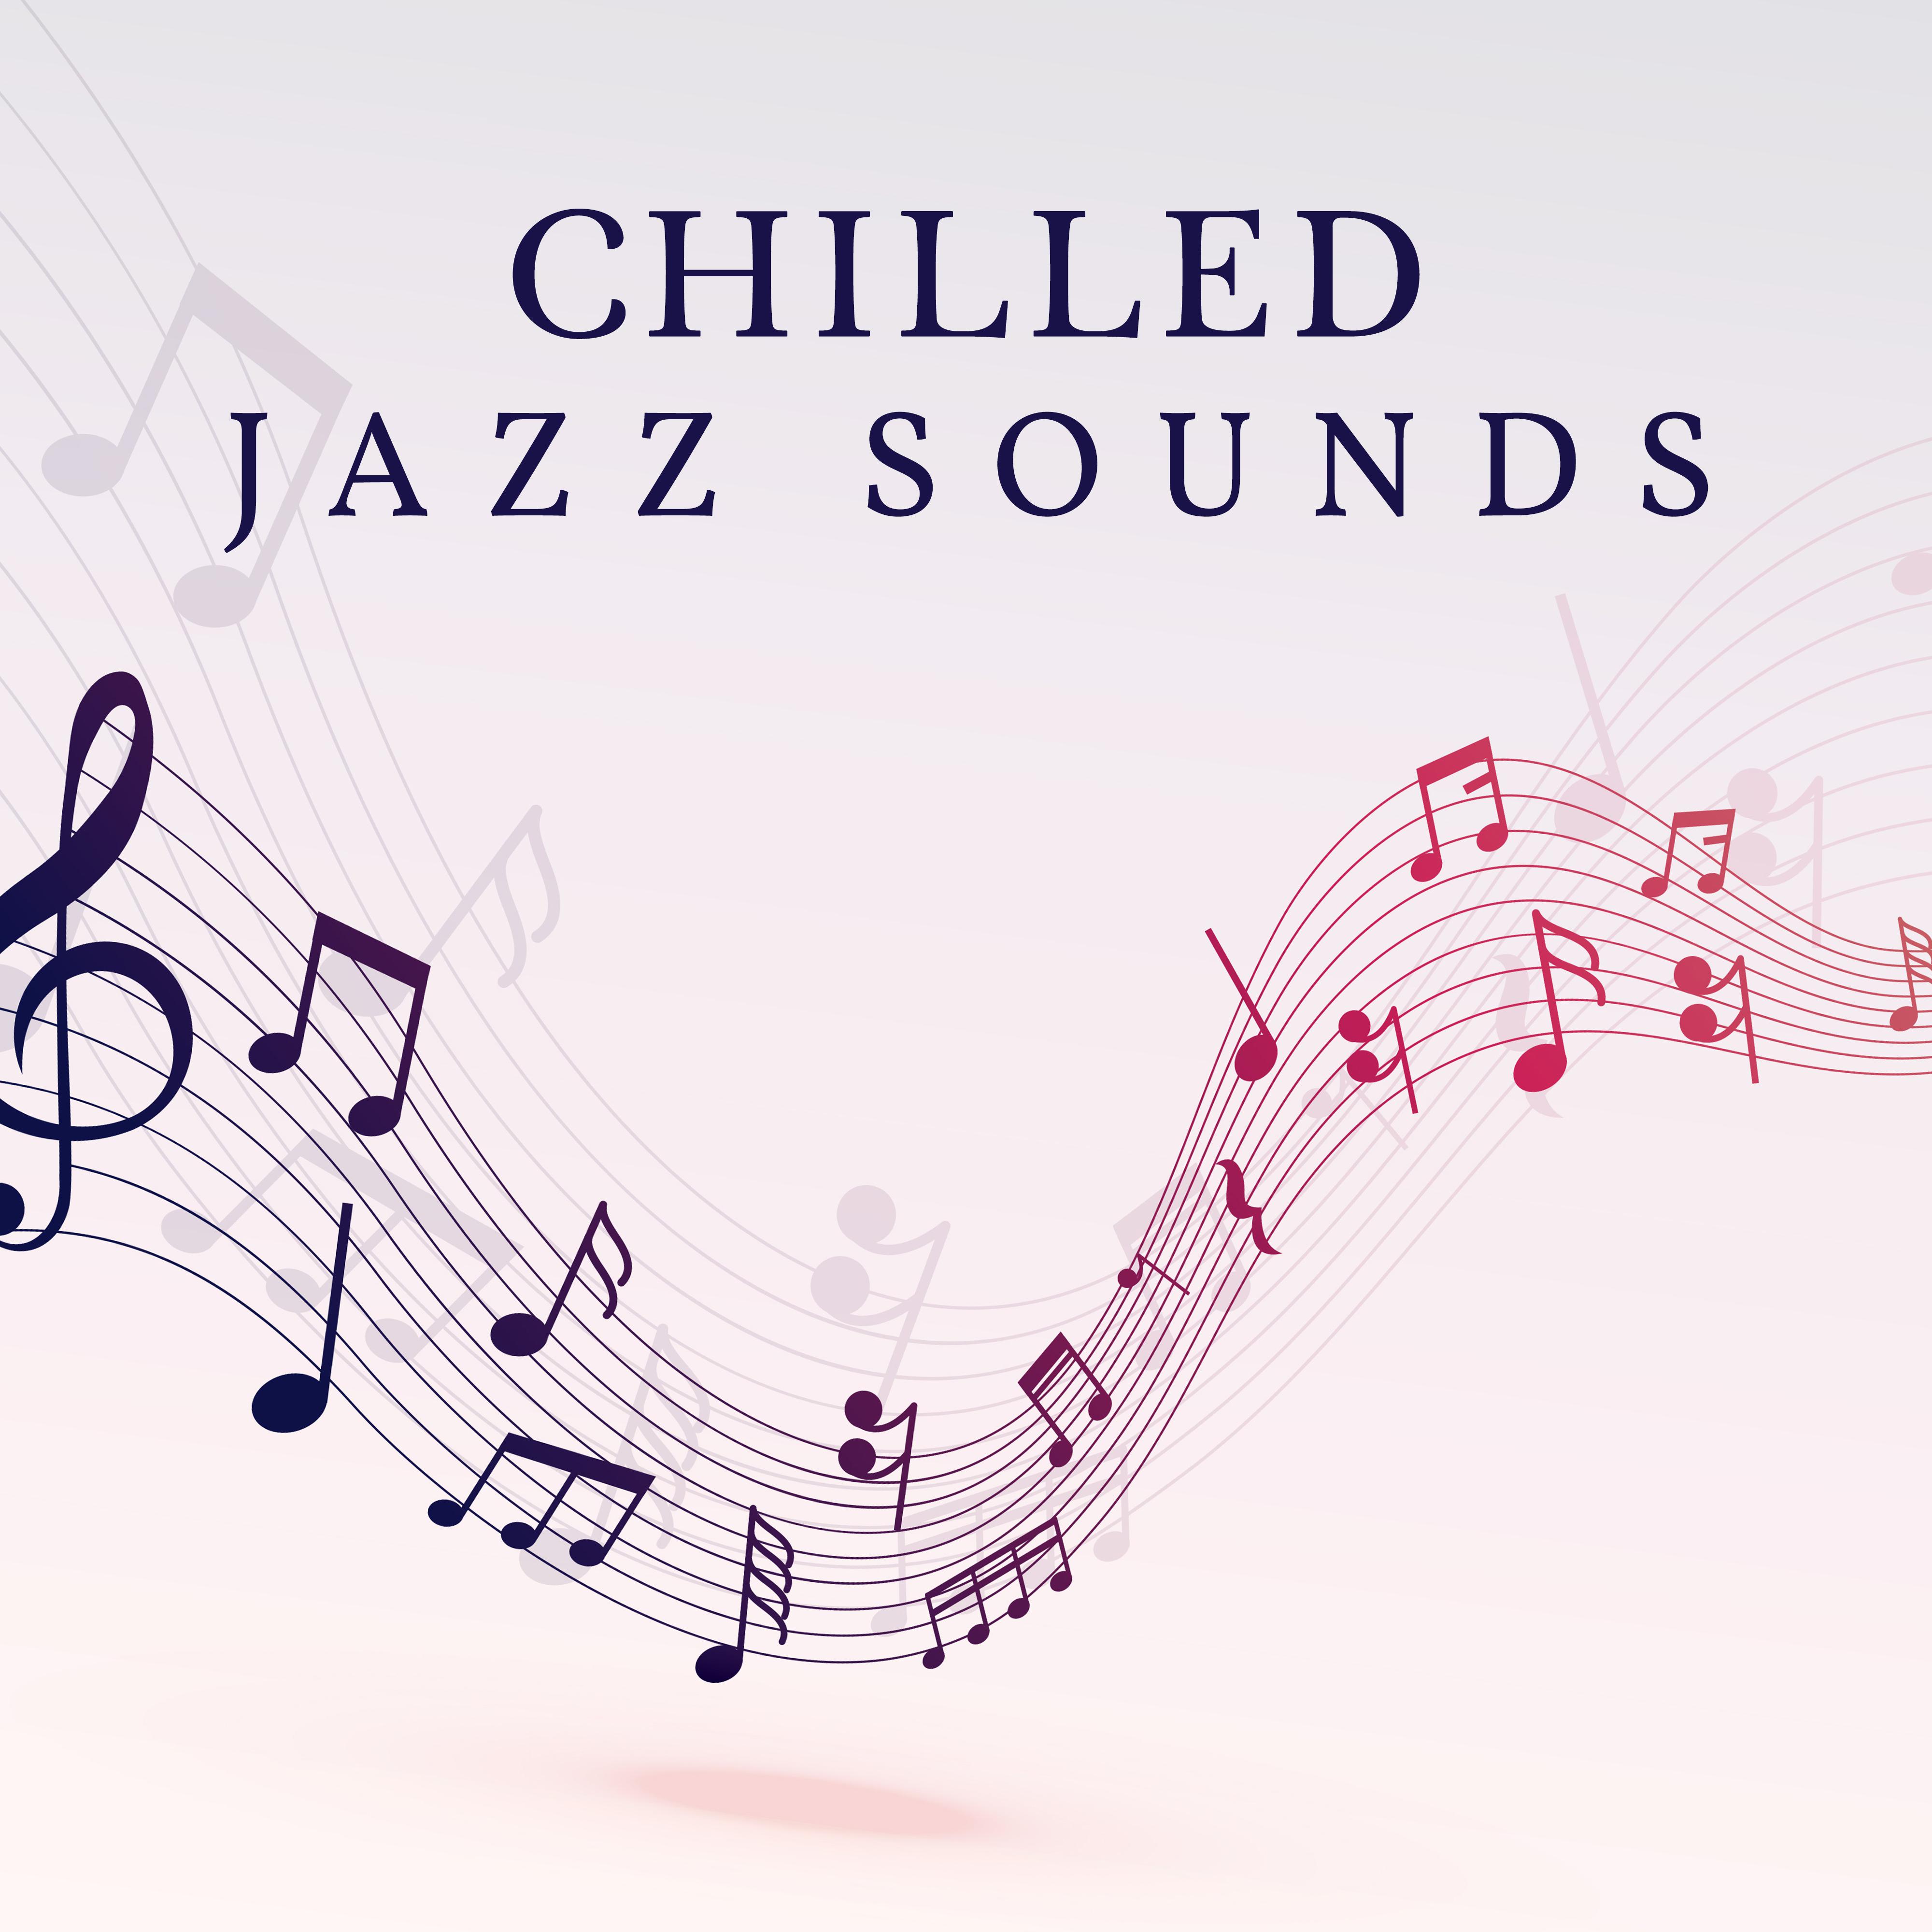 Chilled Jazz Sounds